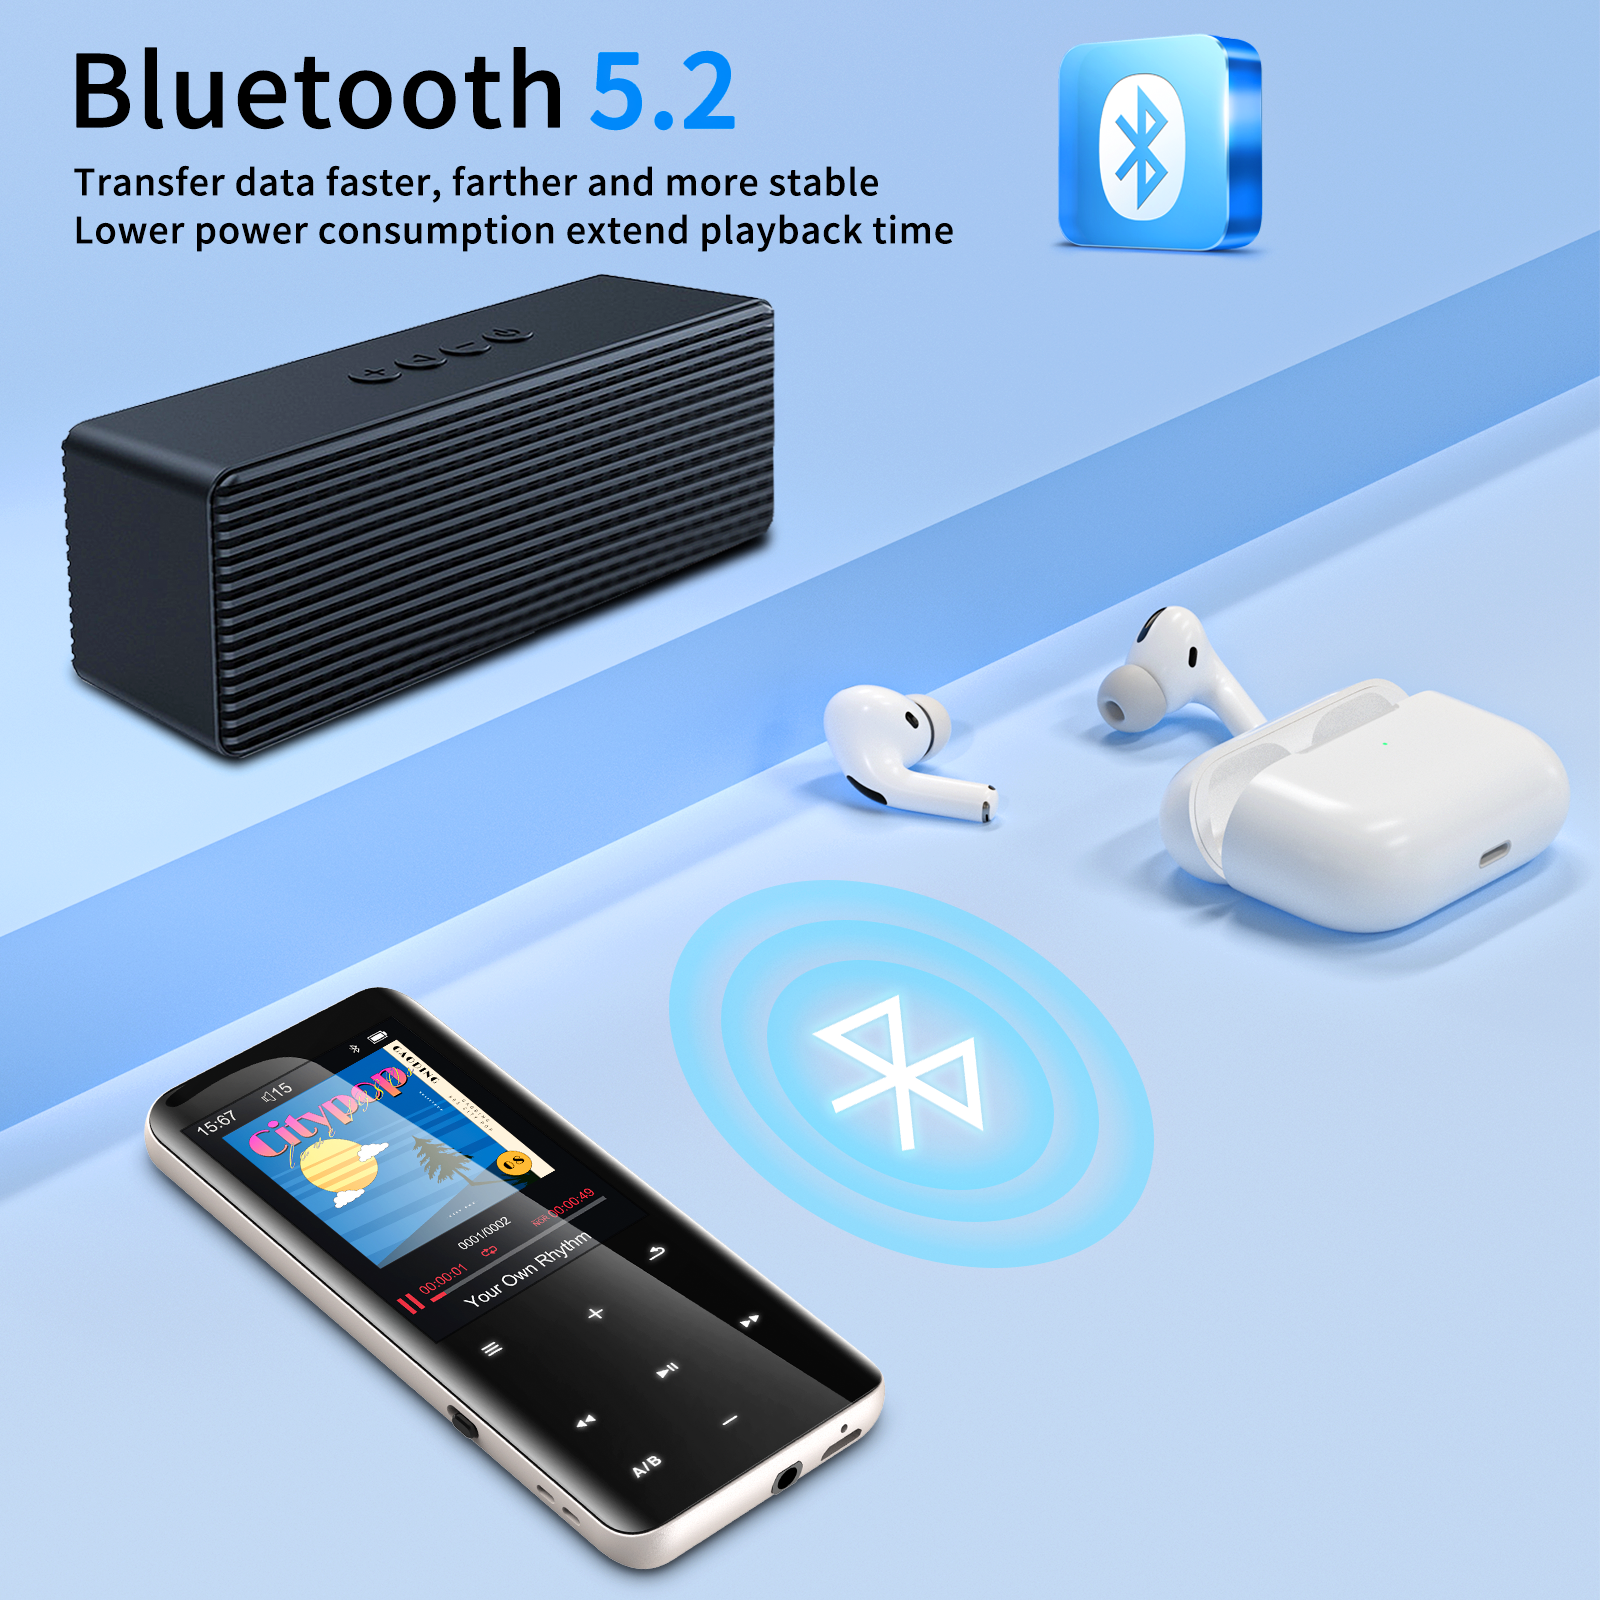 Telele 64GB Mp3 Player with Bluetooth 5.0 - Portable Digital Lossless Music MP3 MP4 Player with FM Radio HD Speaker